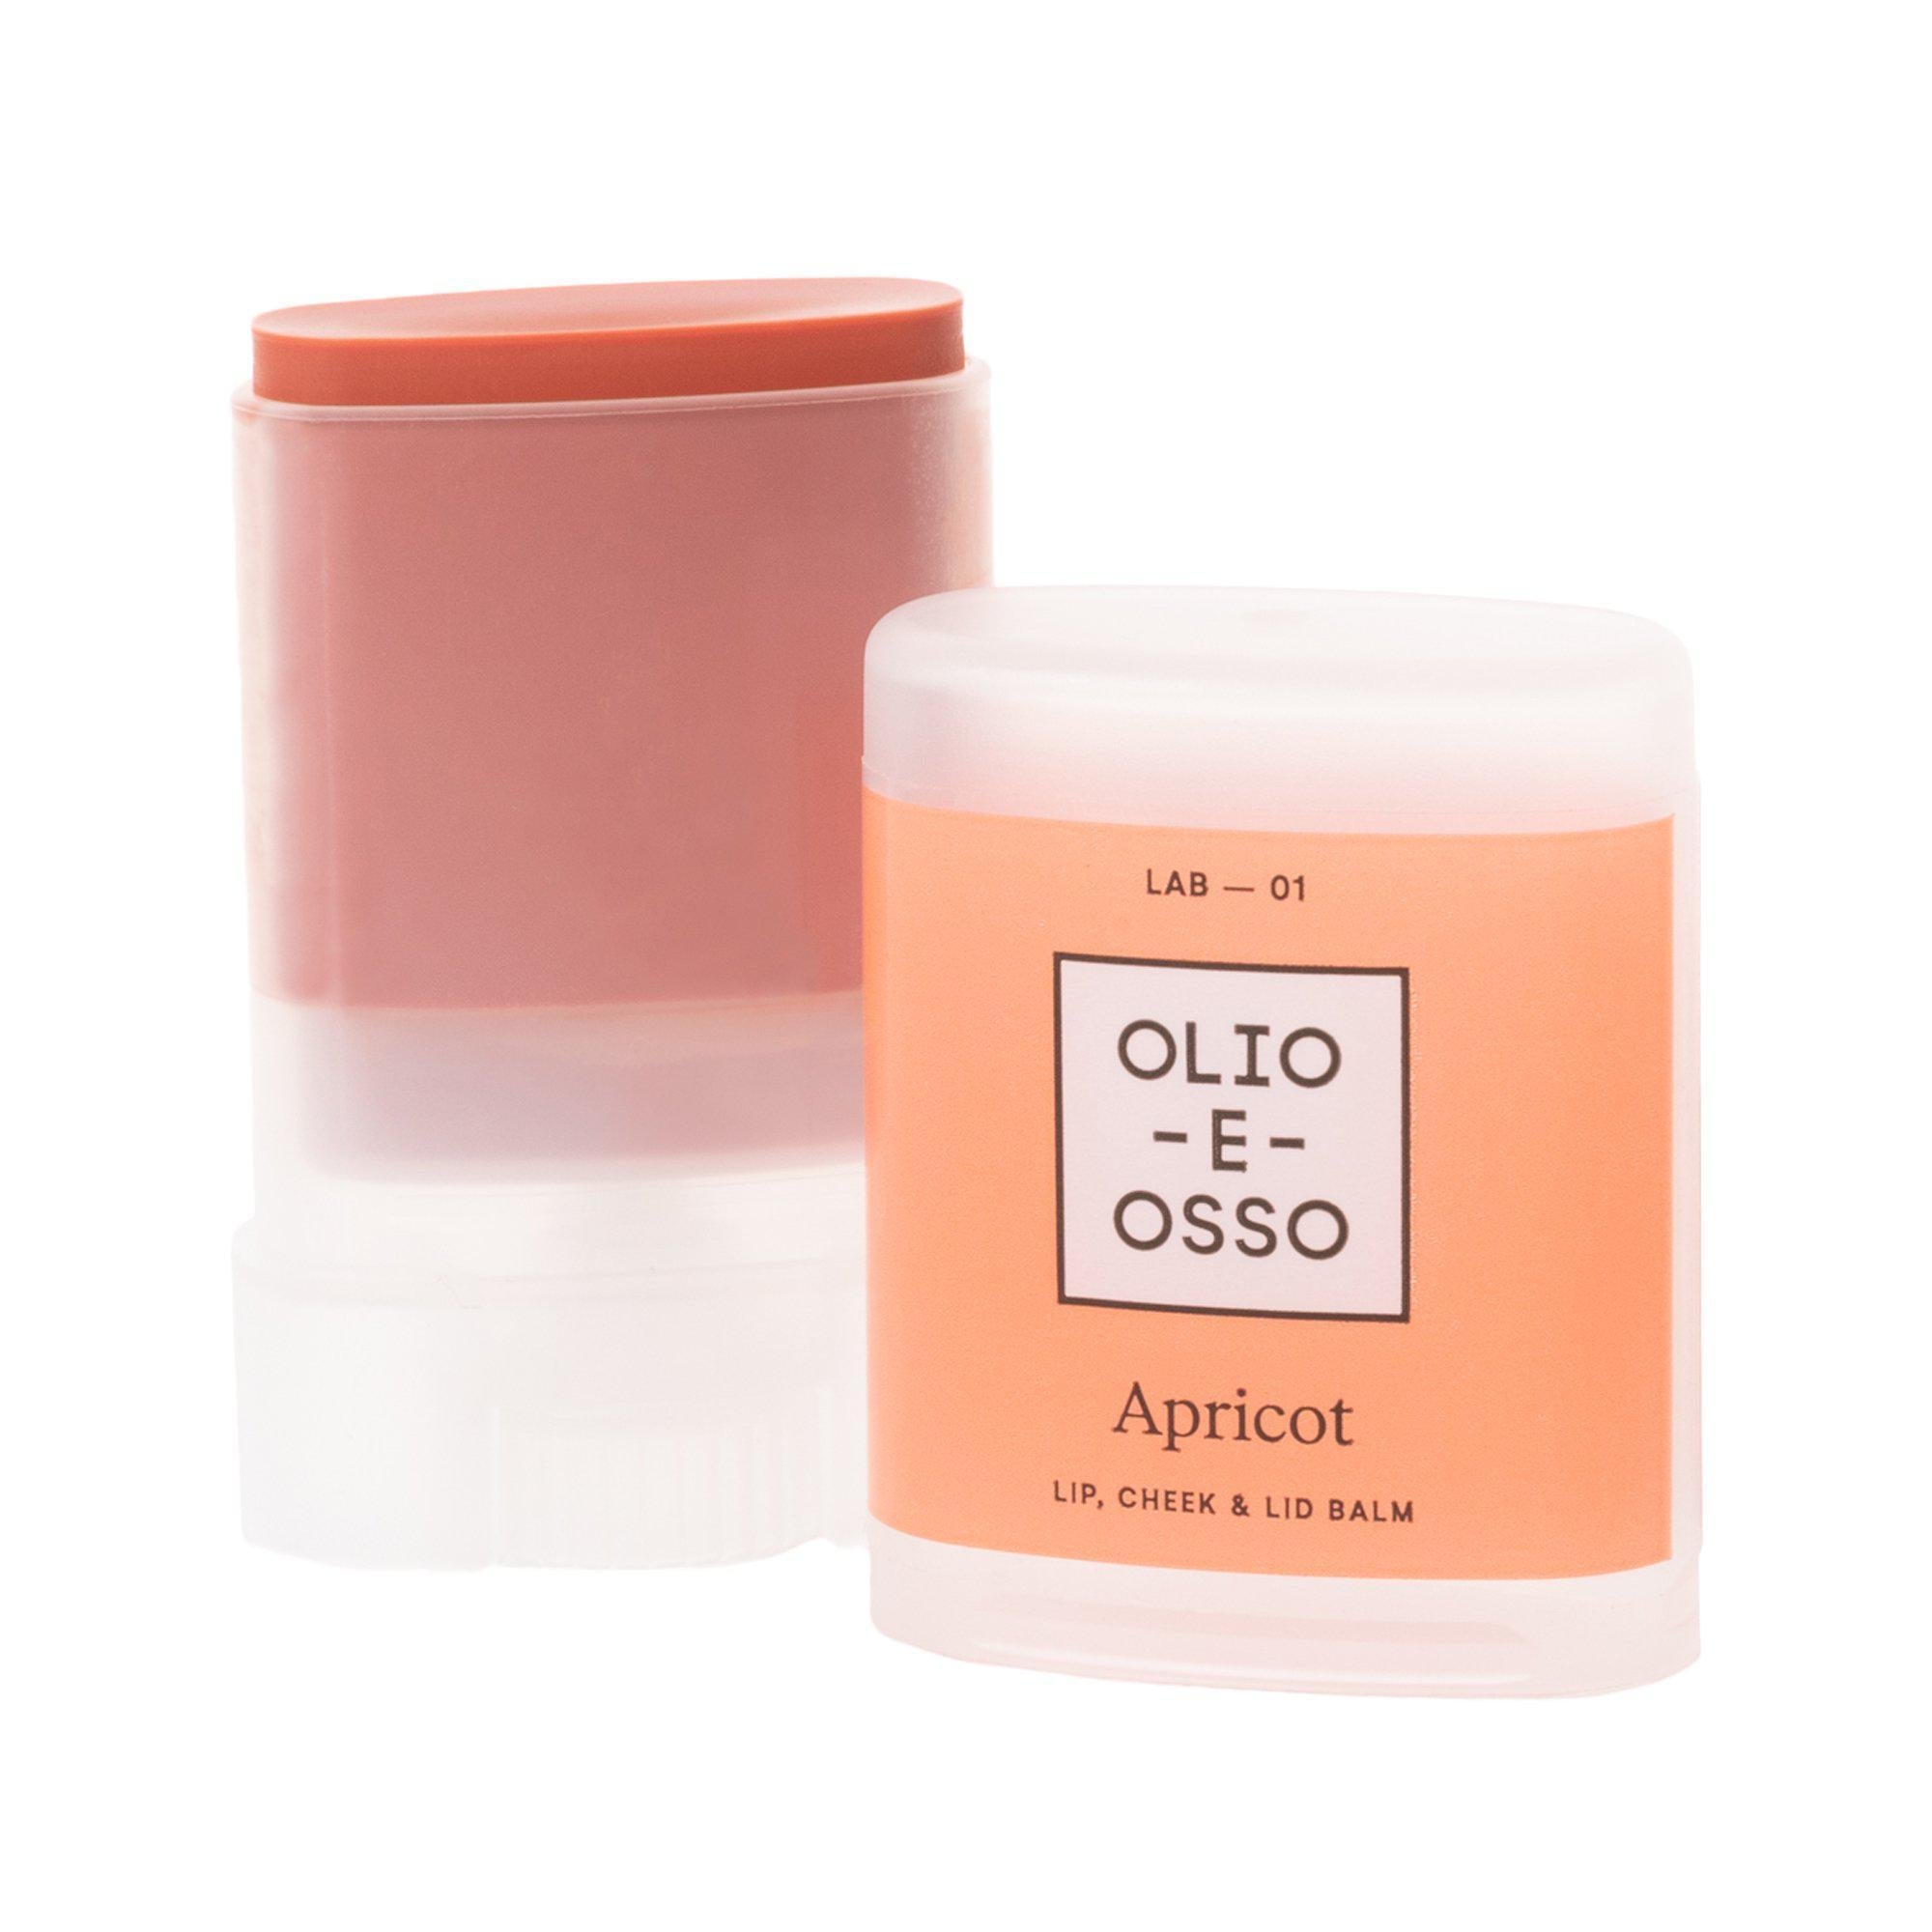 Indisponible - Baume Multifonction - Lab 01 Apricot Unavailable - Multifunction Balm - Lab 01 Apricot - Olio E Osso